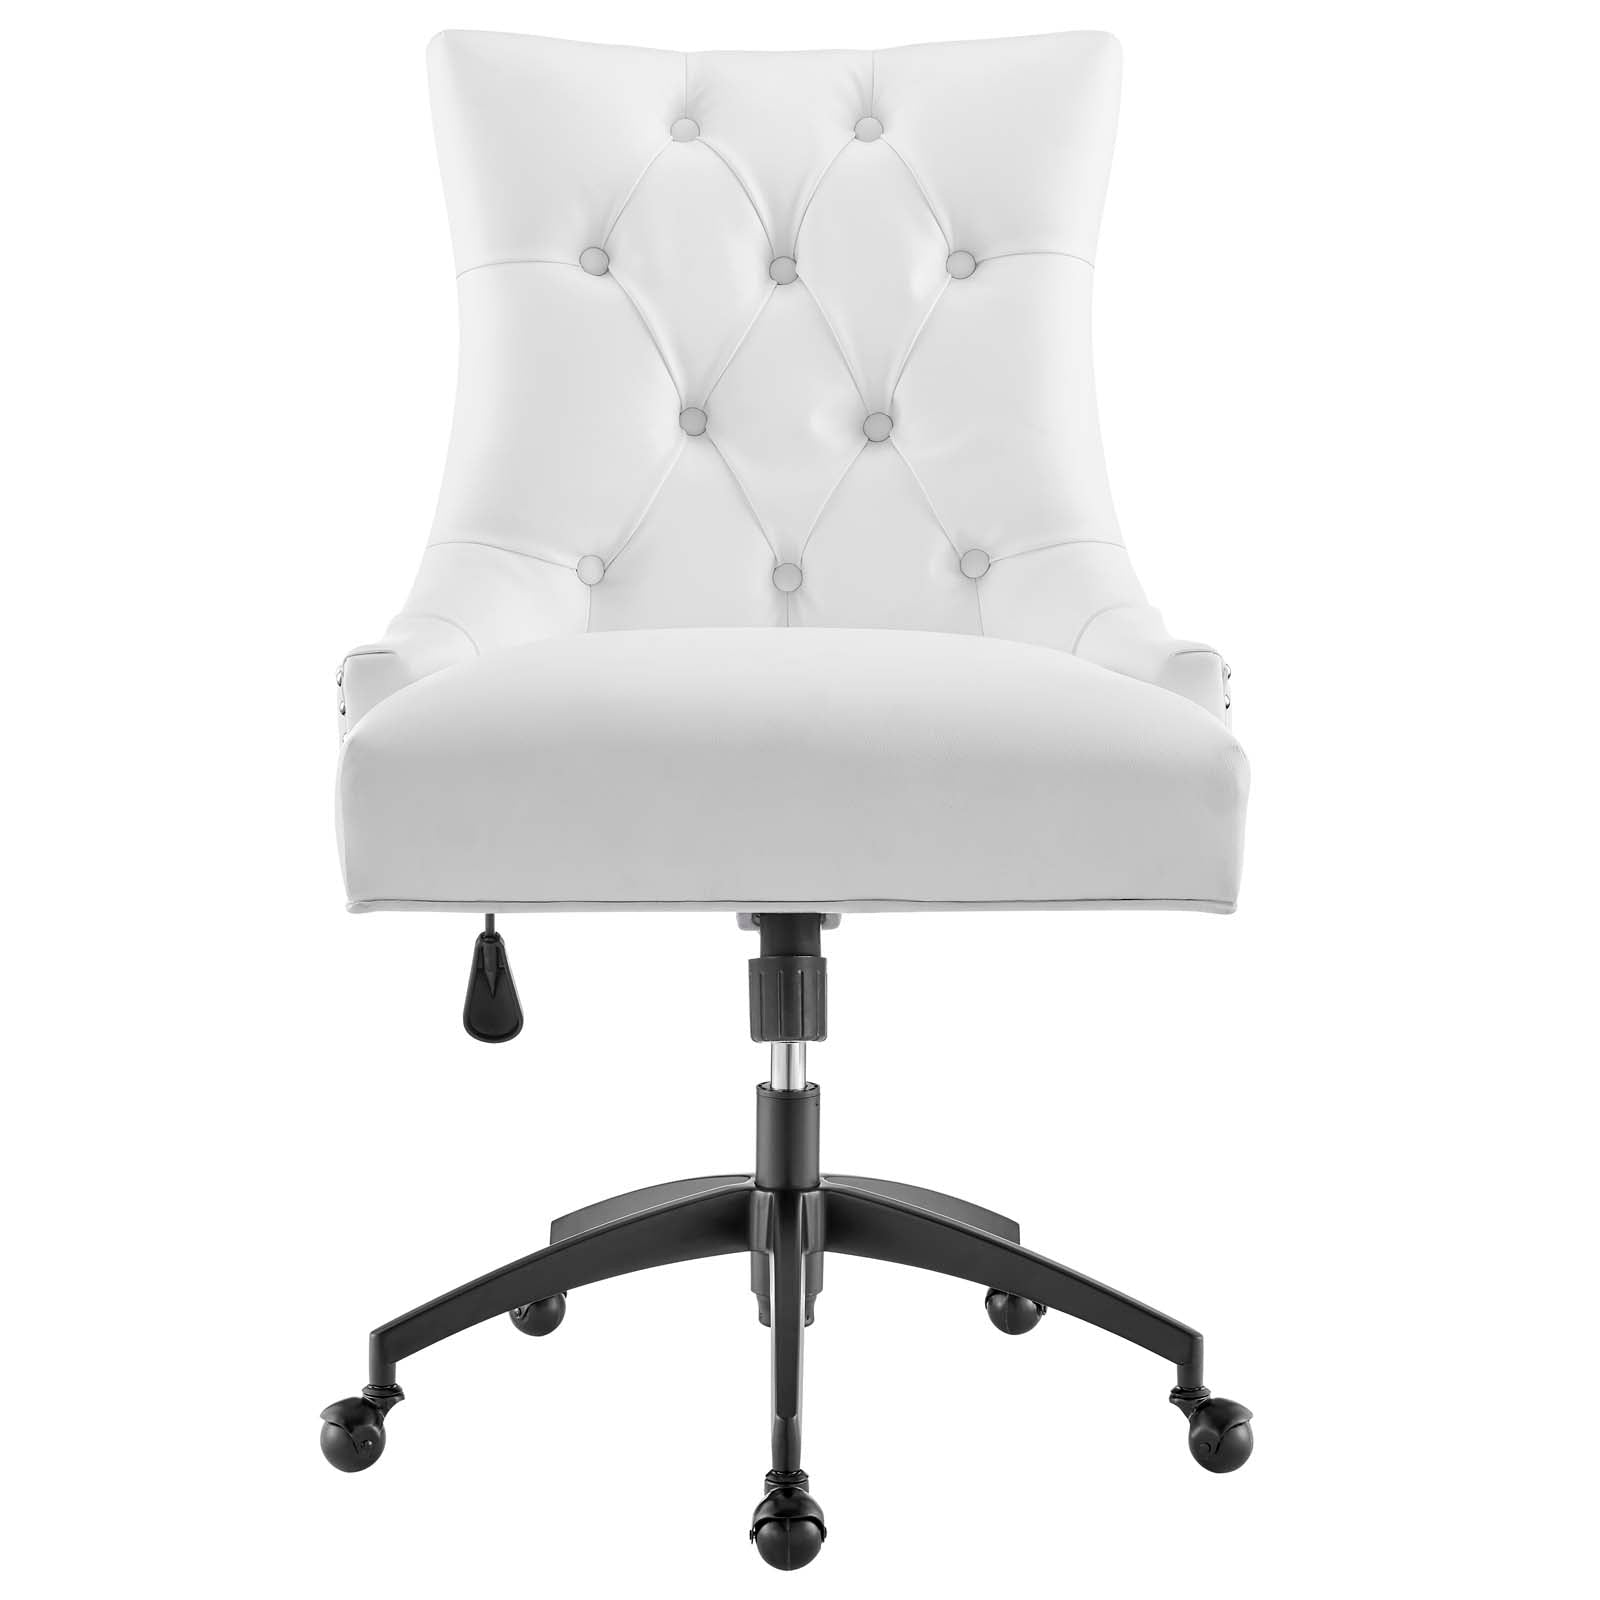 Andrew Vegan Leather Office Chair